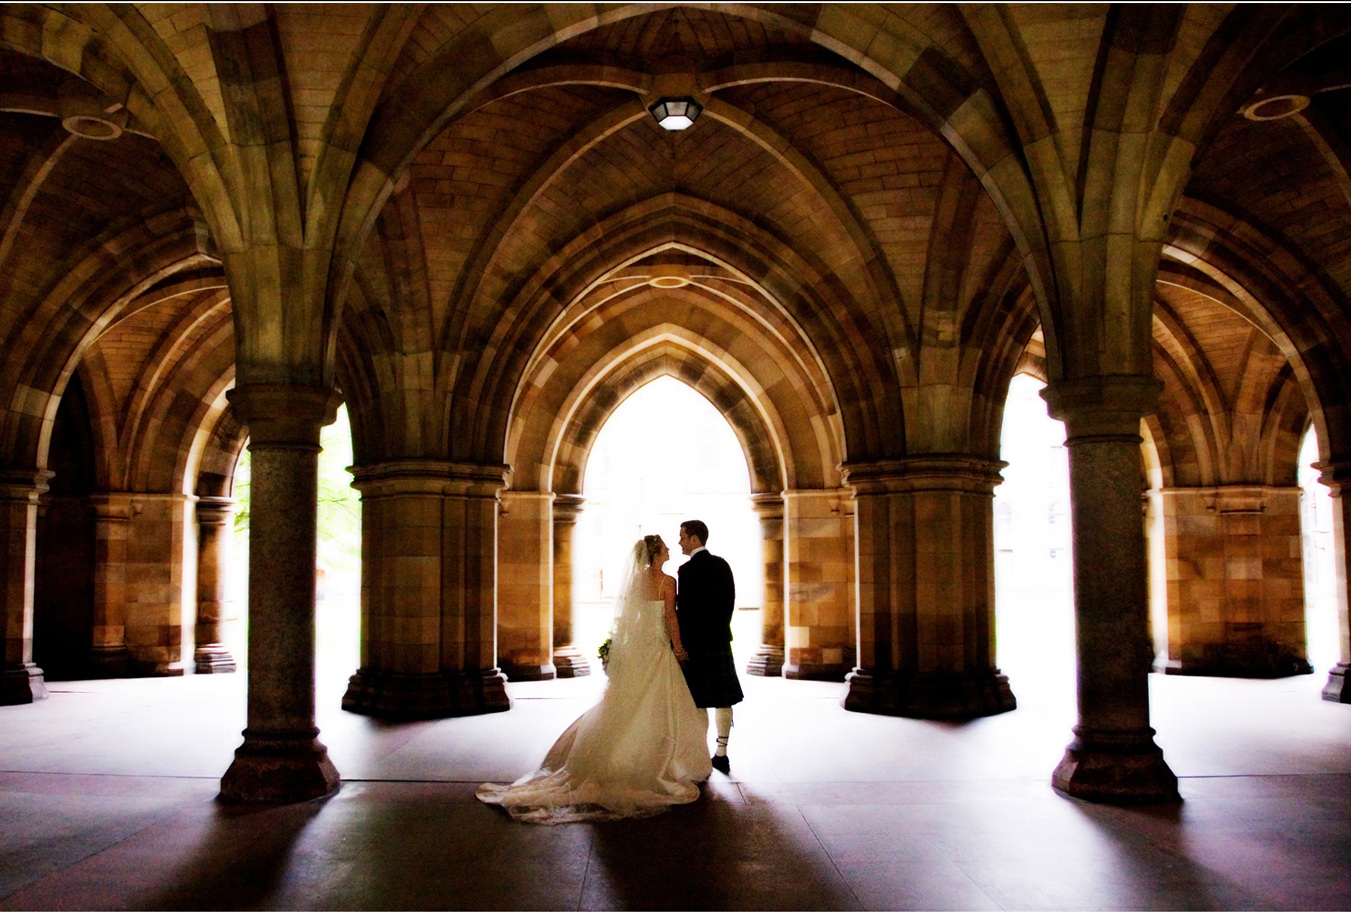 21 Of The Best Wedding Venues In Glasgow For 2021 » The Scottish